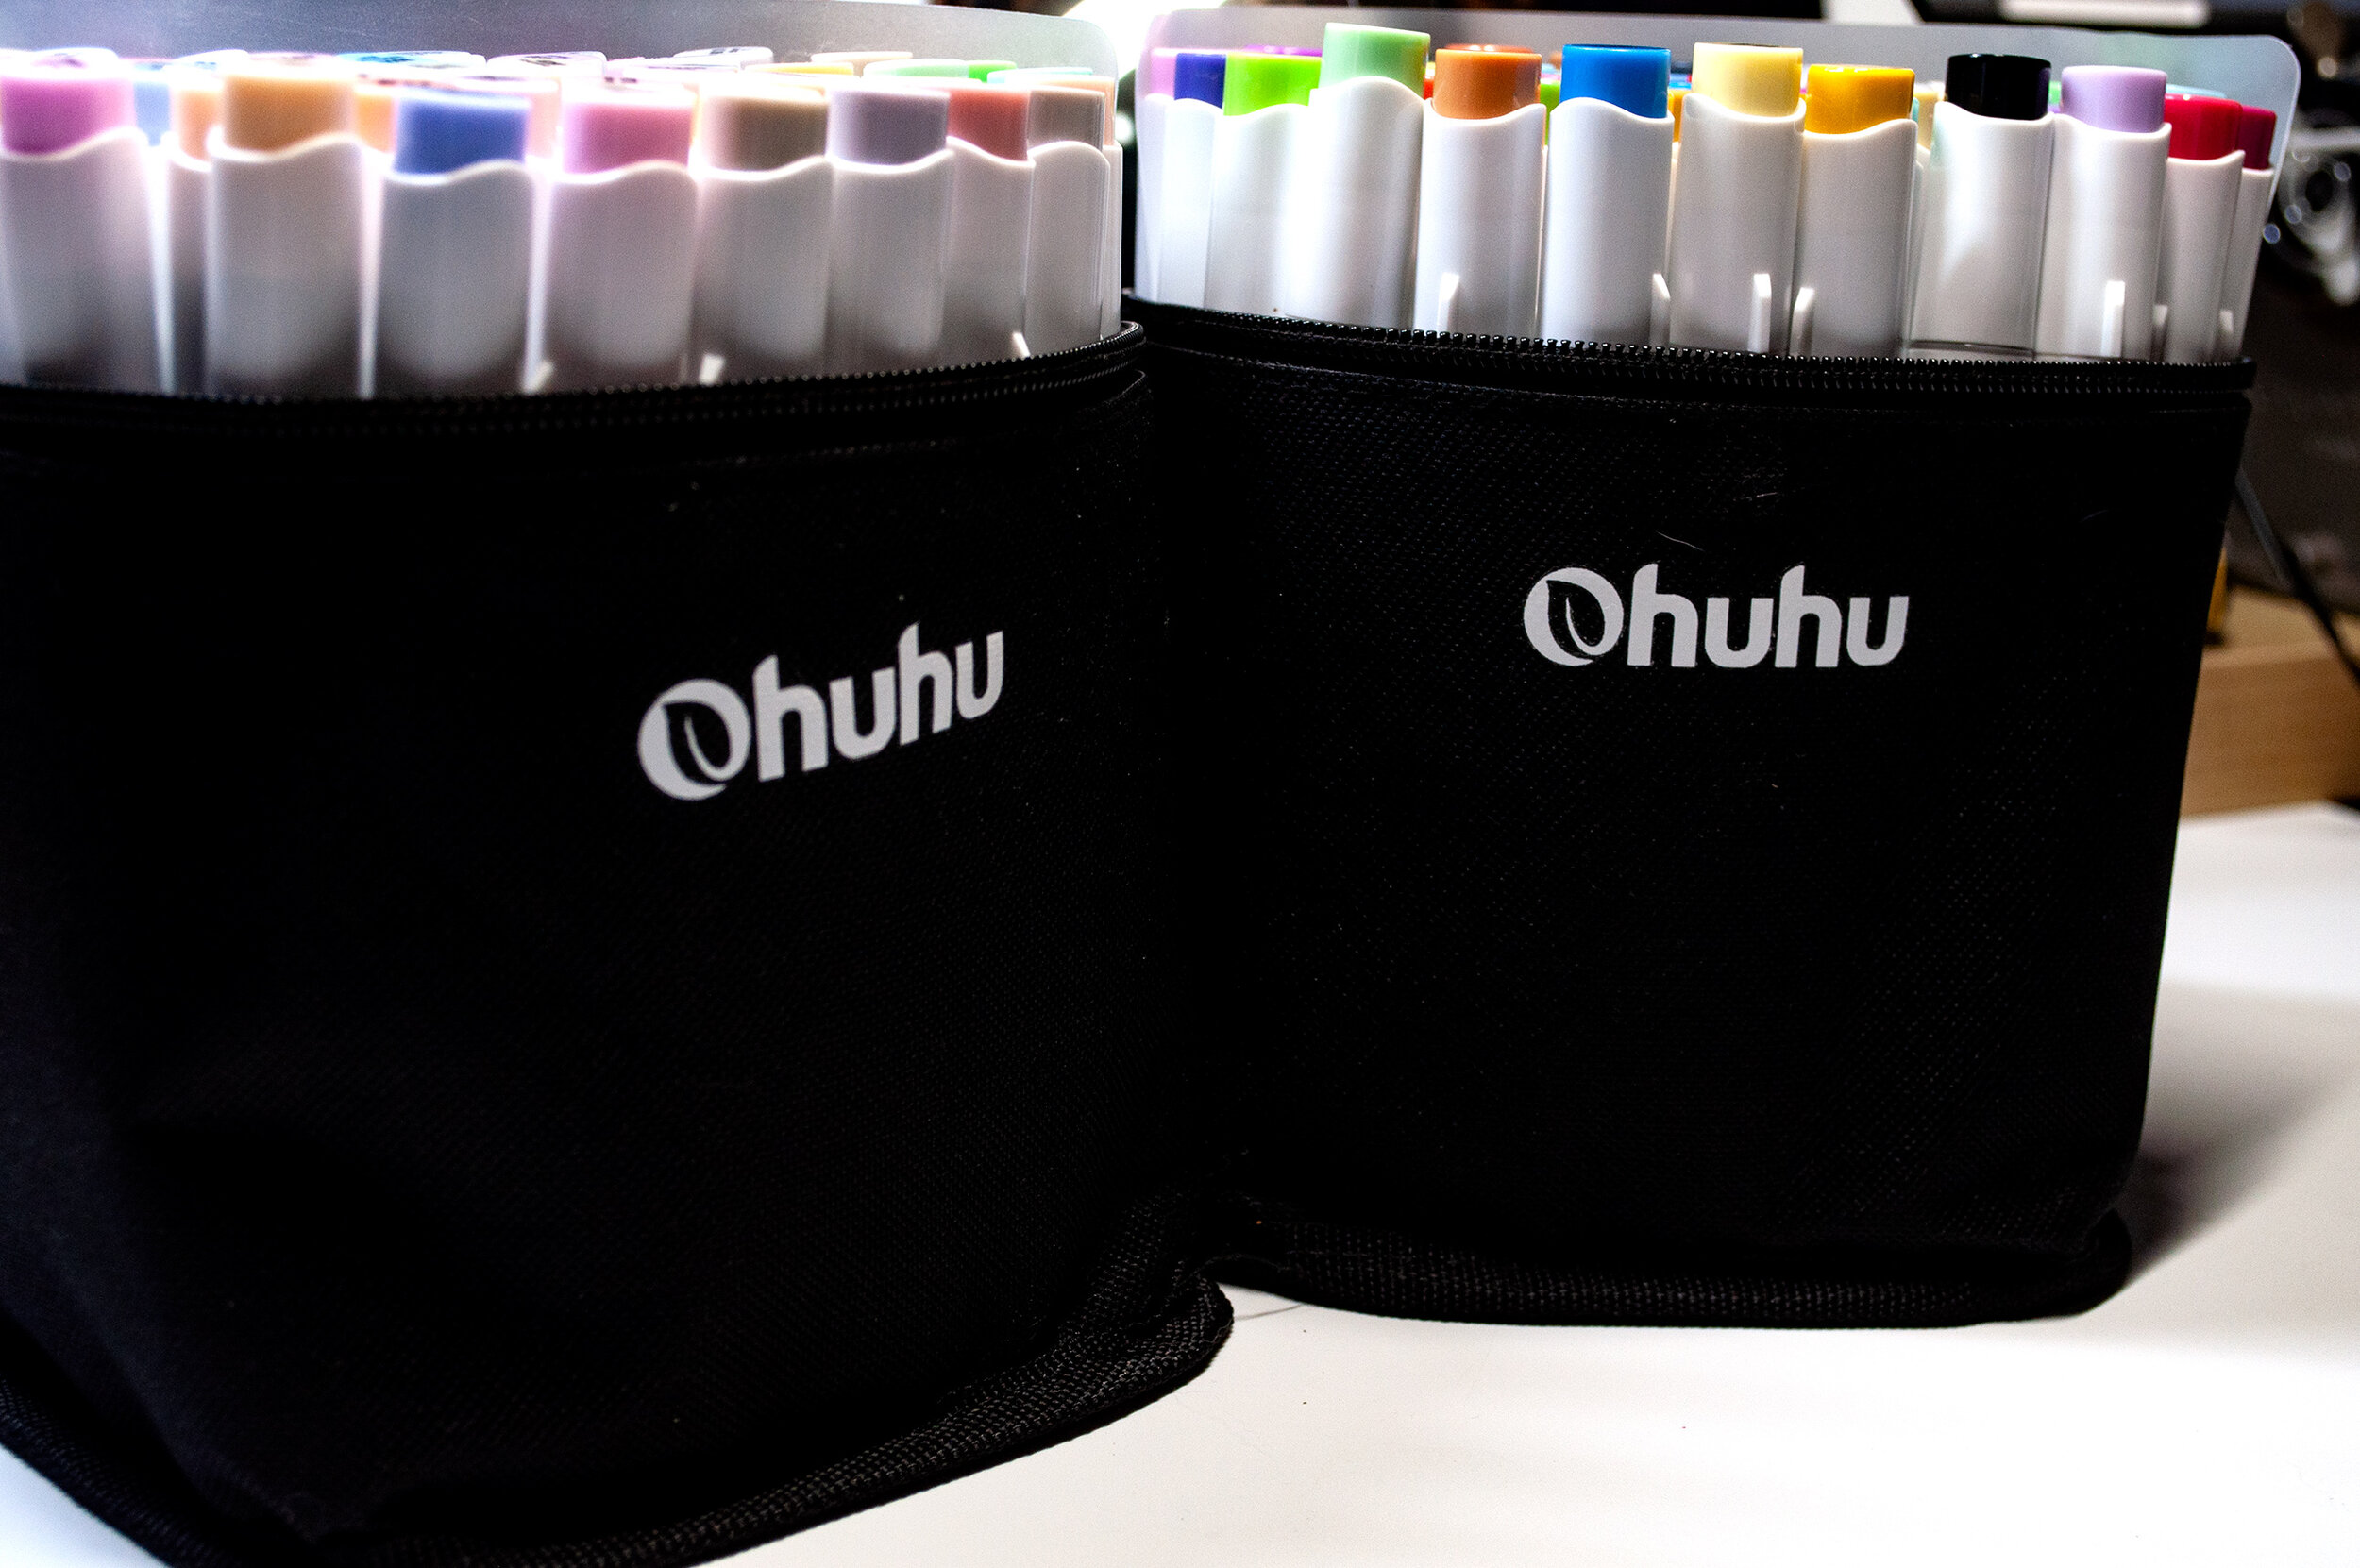 TOUCH FIVE MARKERS vs OHUHU MARKERS - Which cheap Copic